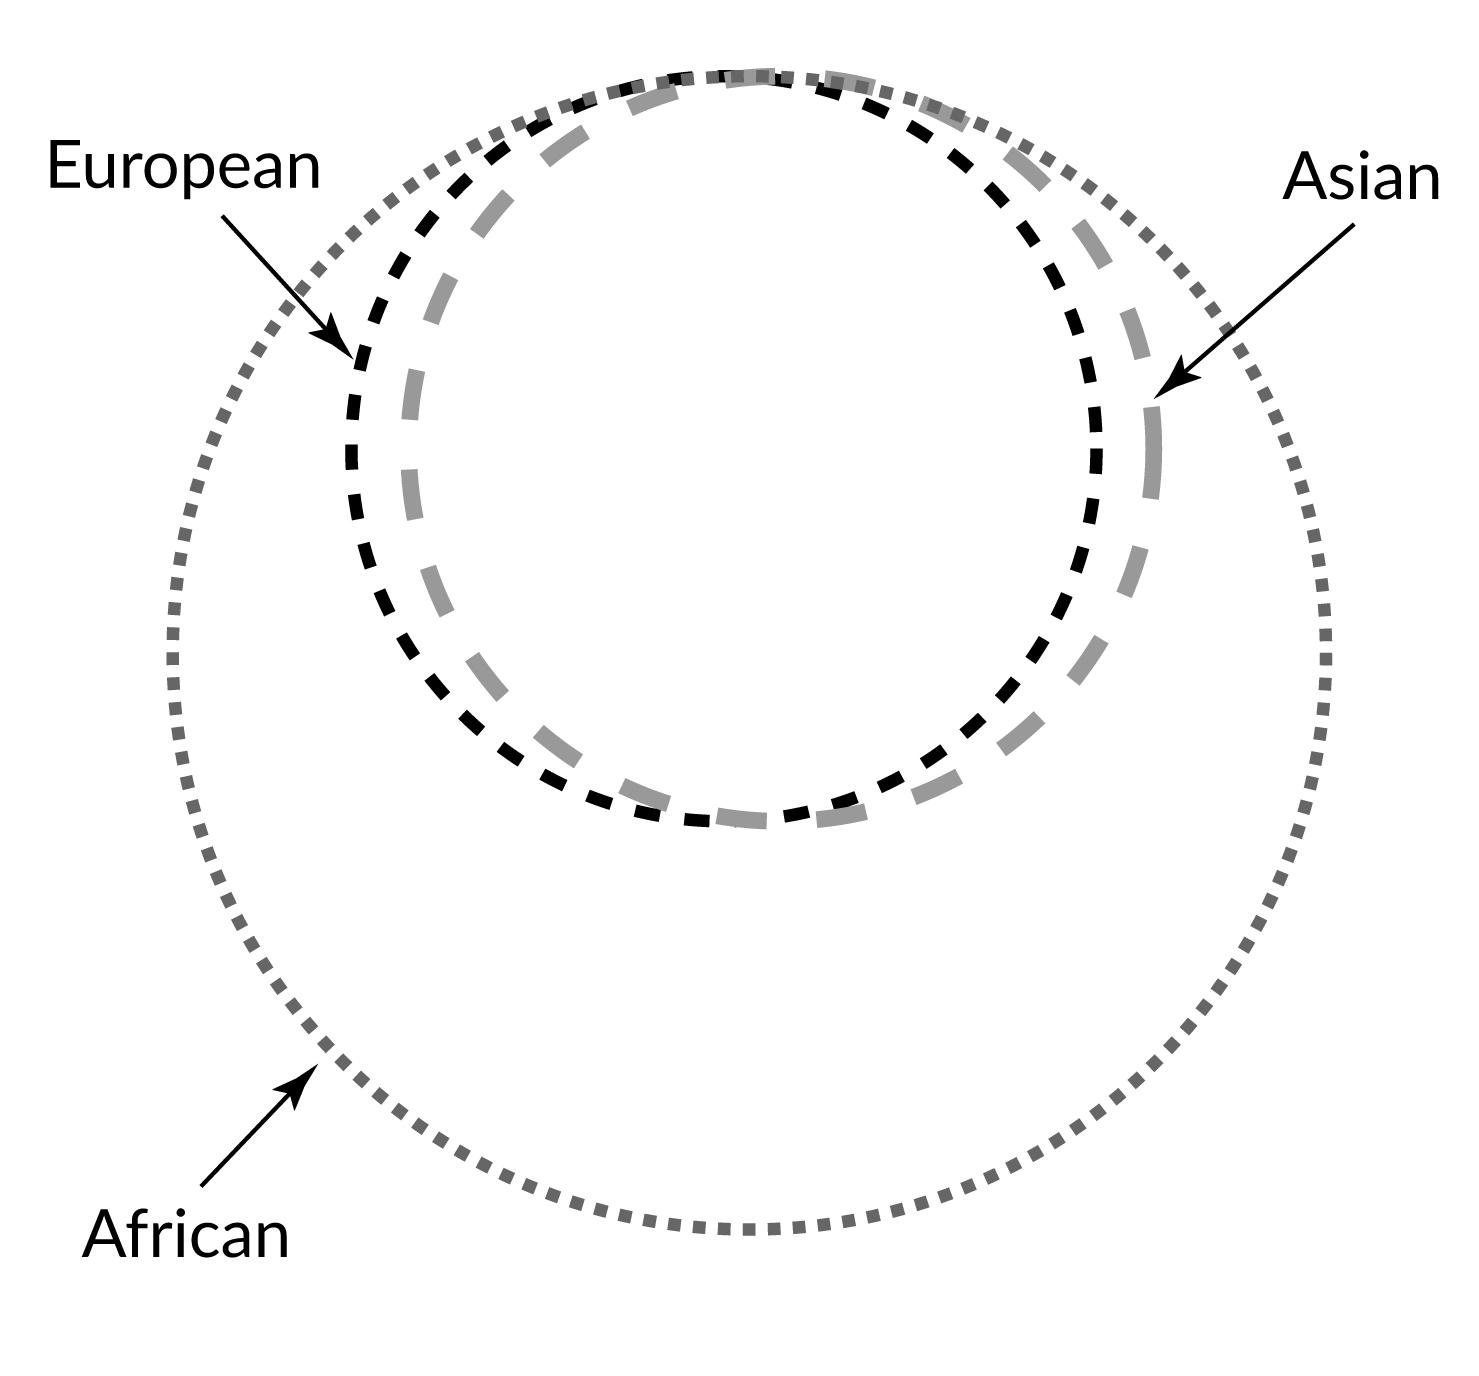 Two medium-sized circles labeled Asian and European largely overlap. A larger circle labeled African surrounds both.